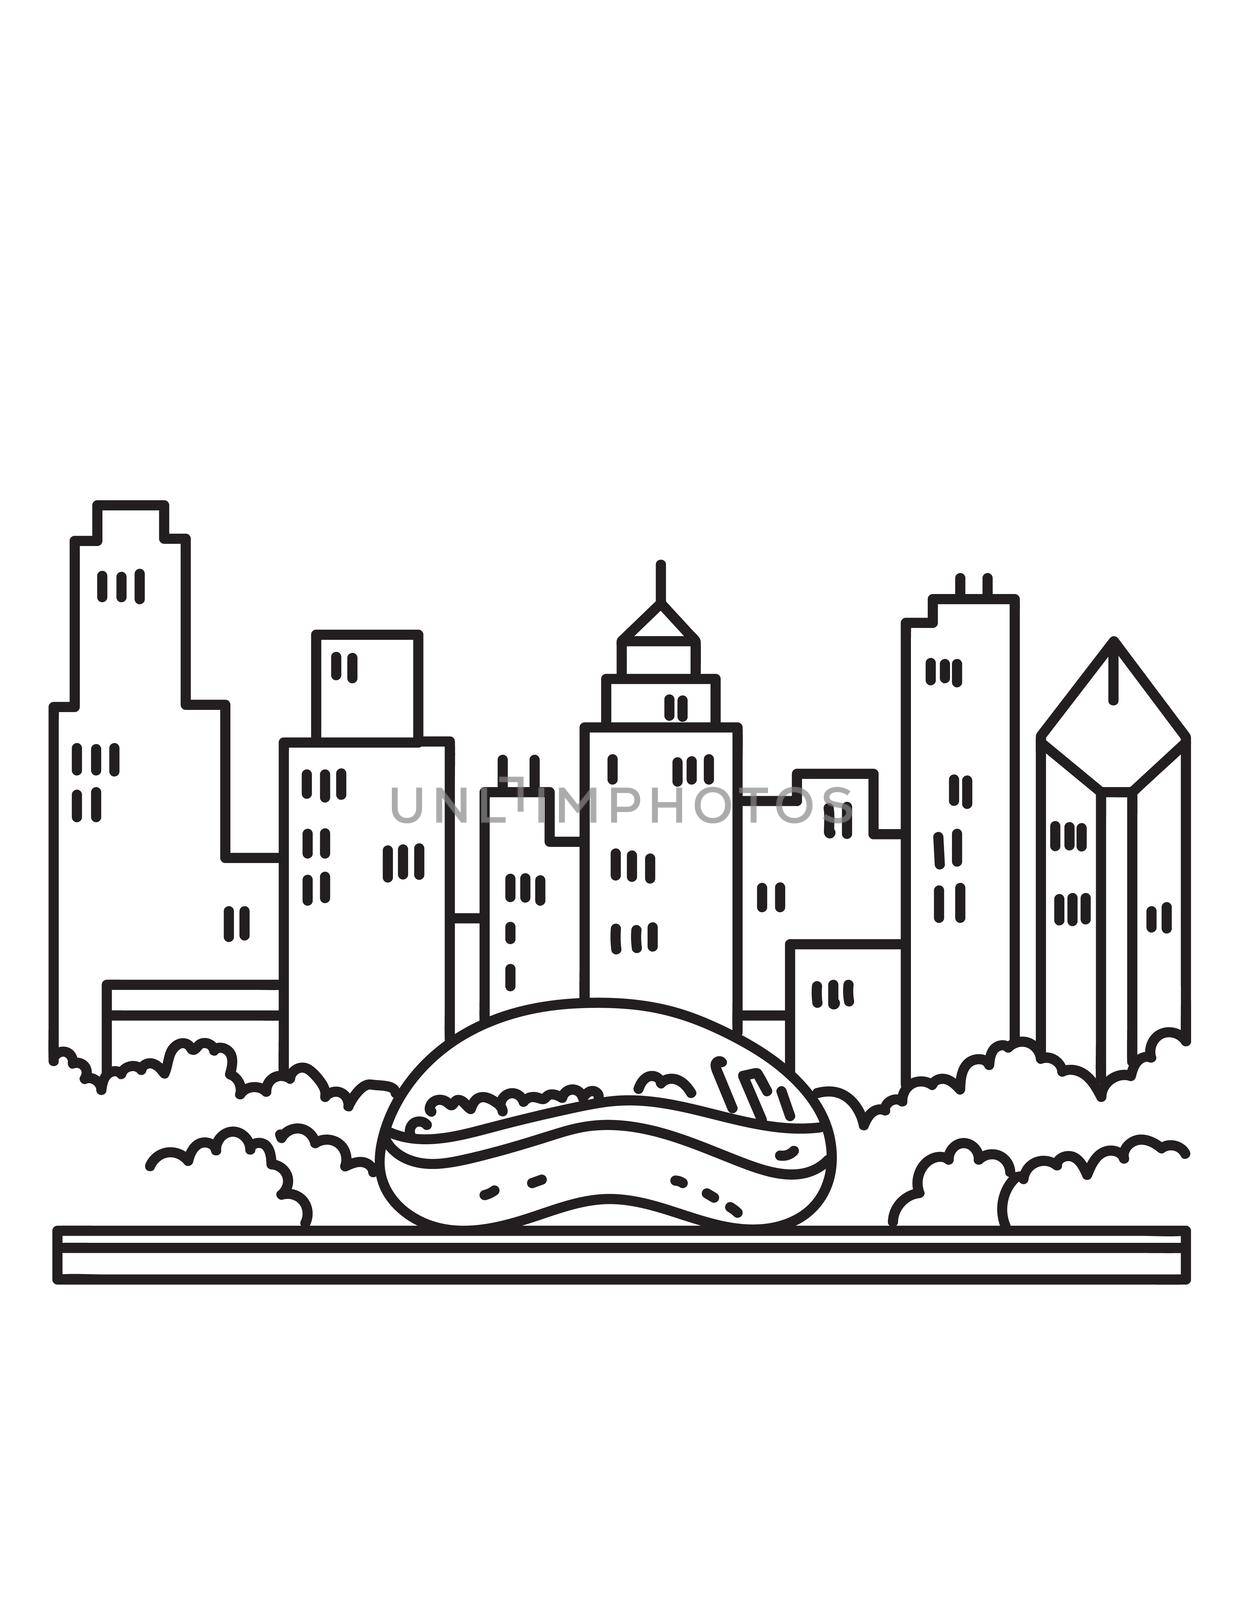 Chicago Downtown Skyline with the Bean or Cloud Gate Sculpture on Park Grill Lake Michigan Illinois USA Mono Line Art Poster  by patrimonio